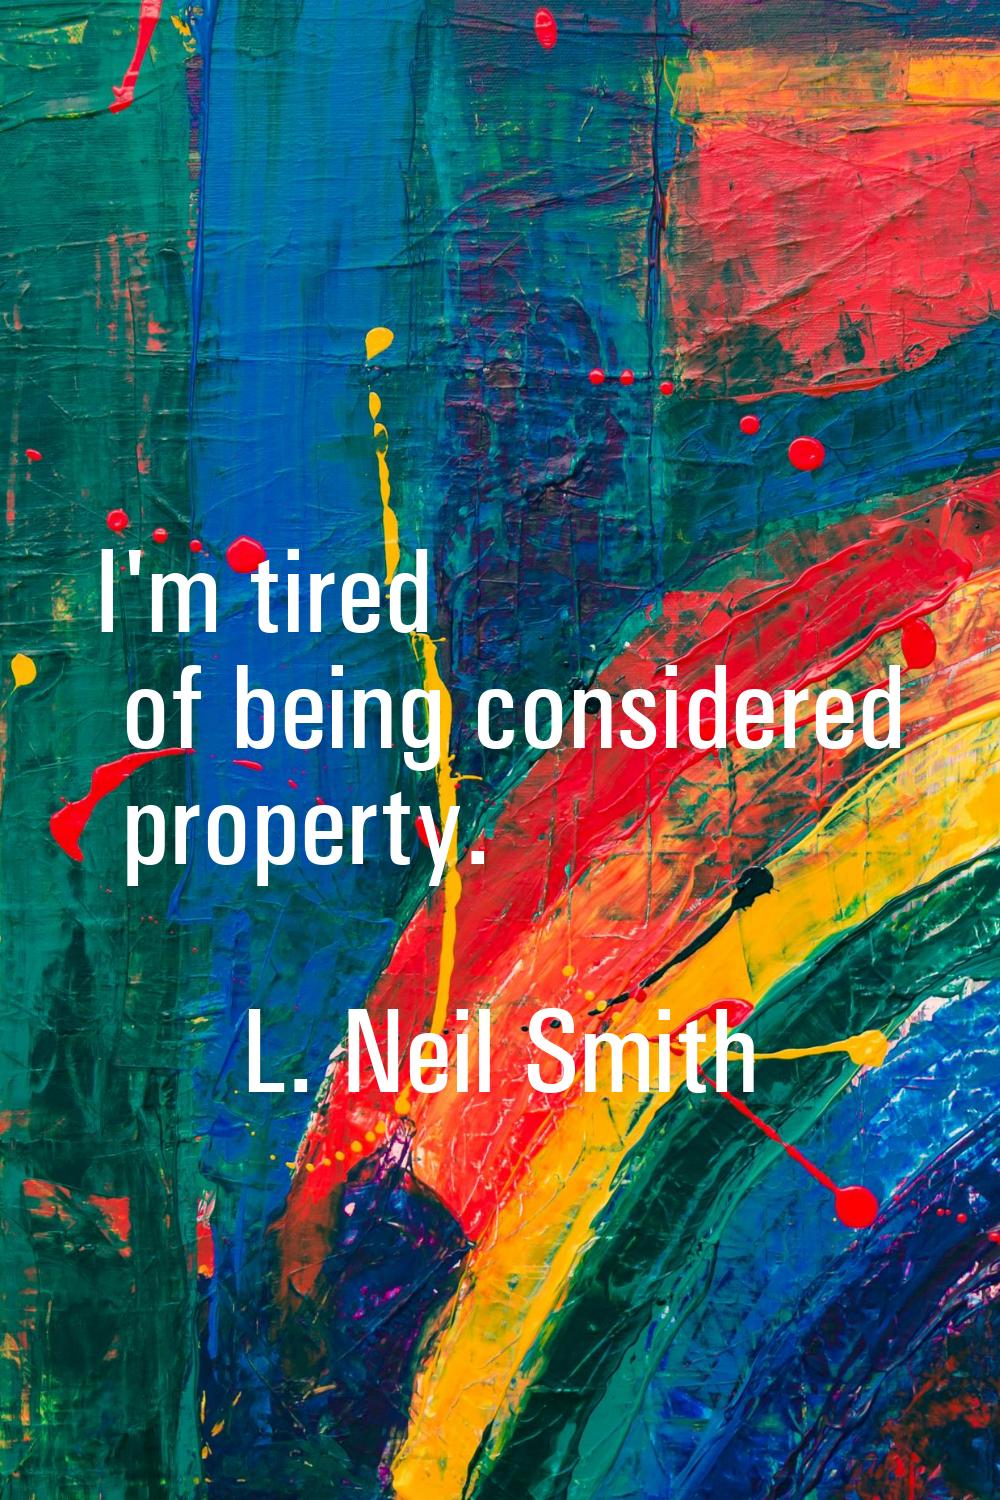 I'm tired of being considered property.